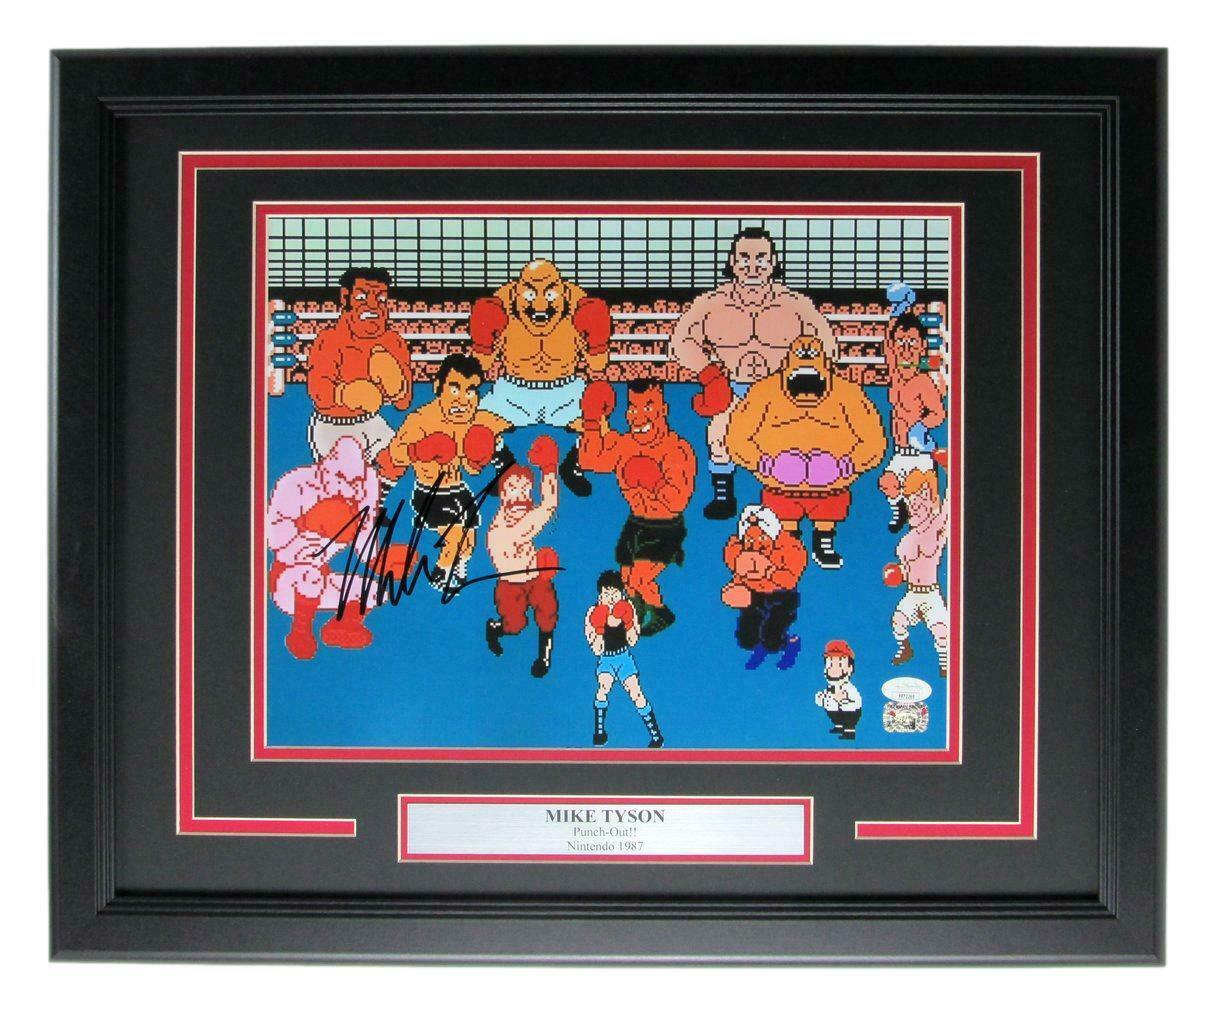 Mike Tyson Boxing Champ Signed/autographed 11x14 Photo Framed Jsa 161731